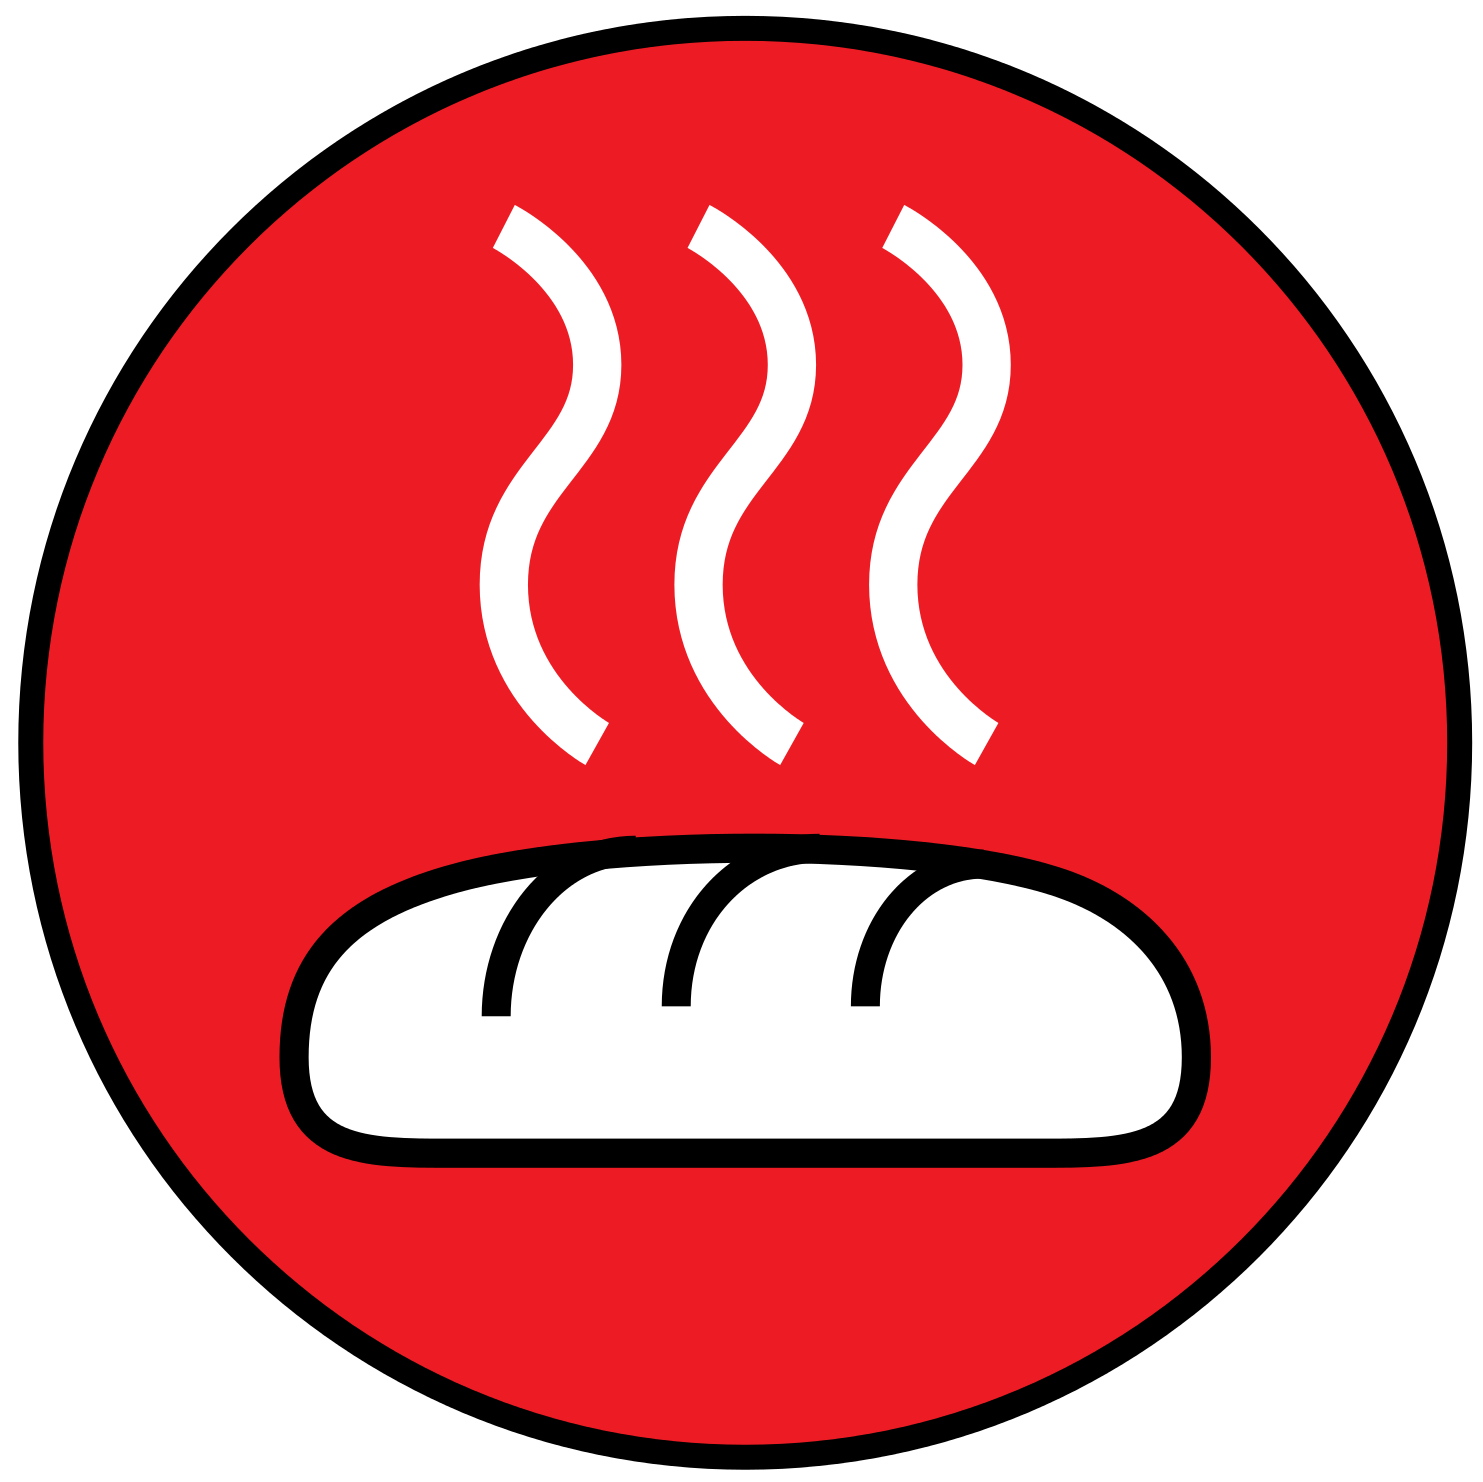 oven clipart baked